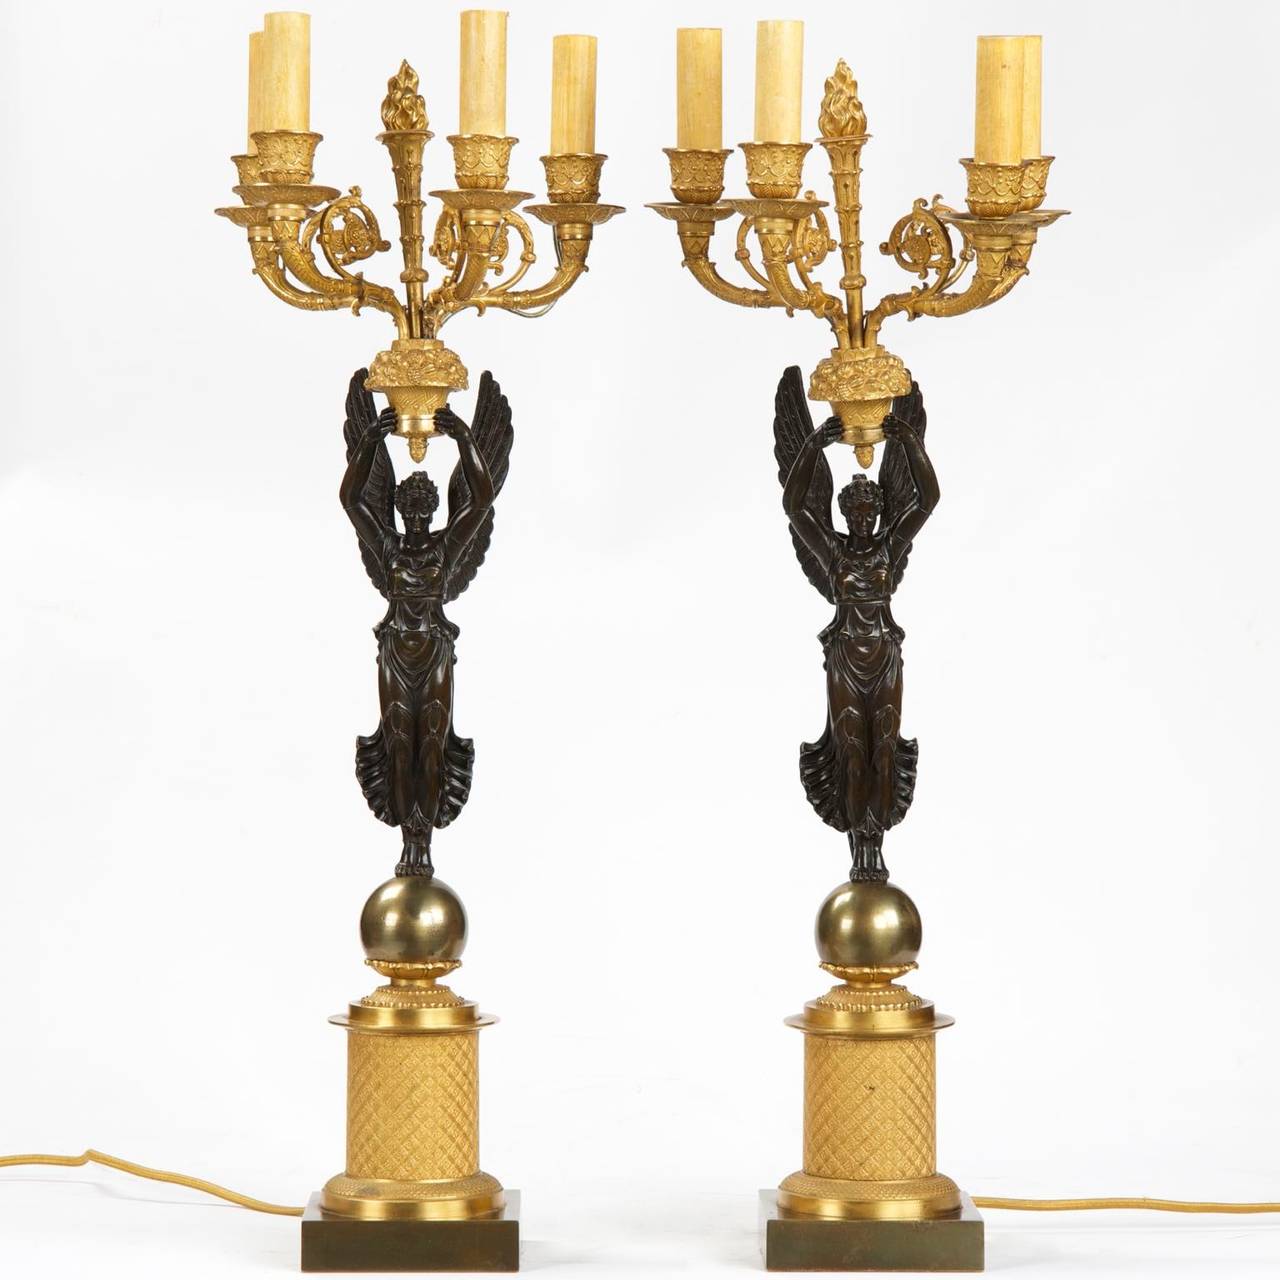 A very fine pair of French Empire Style Gilt and Patinated Bronze Four-Light Candelabra raised over the allegorical 